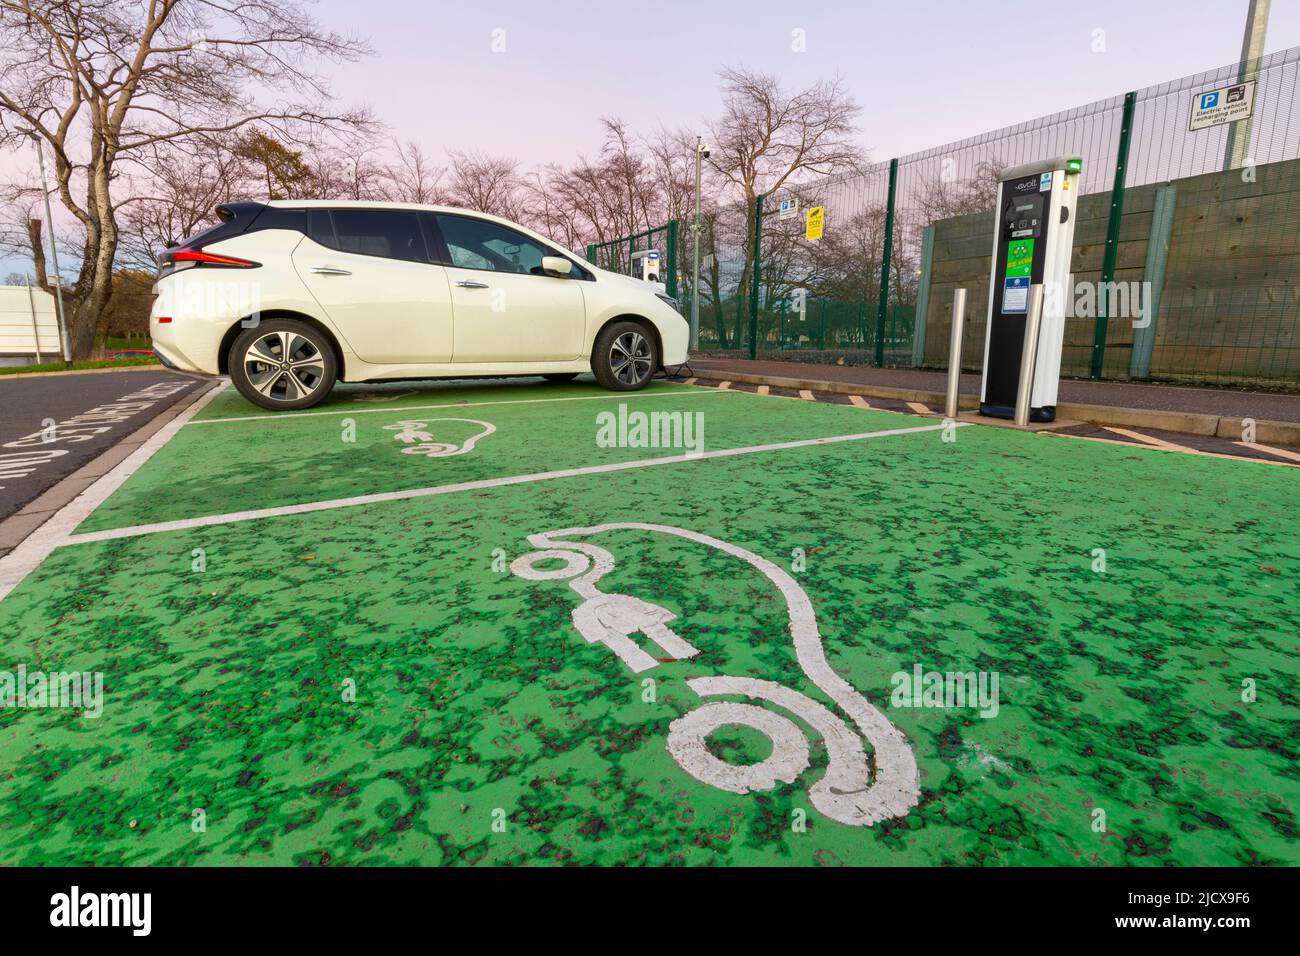 Electric car charging point and car parking space, Glasgow, Scotland, United Kingdom, Europe Stock Photo